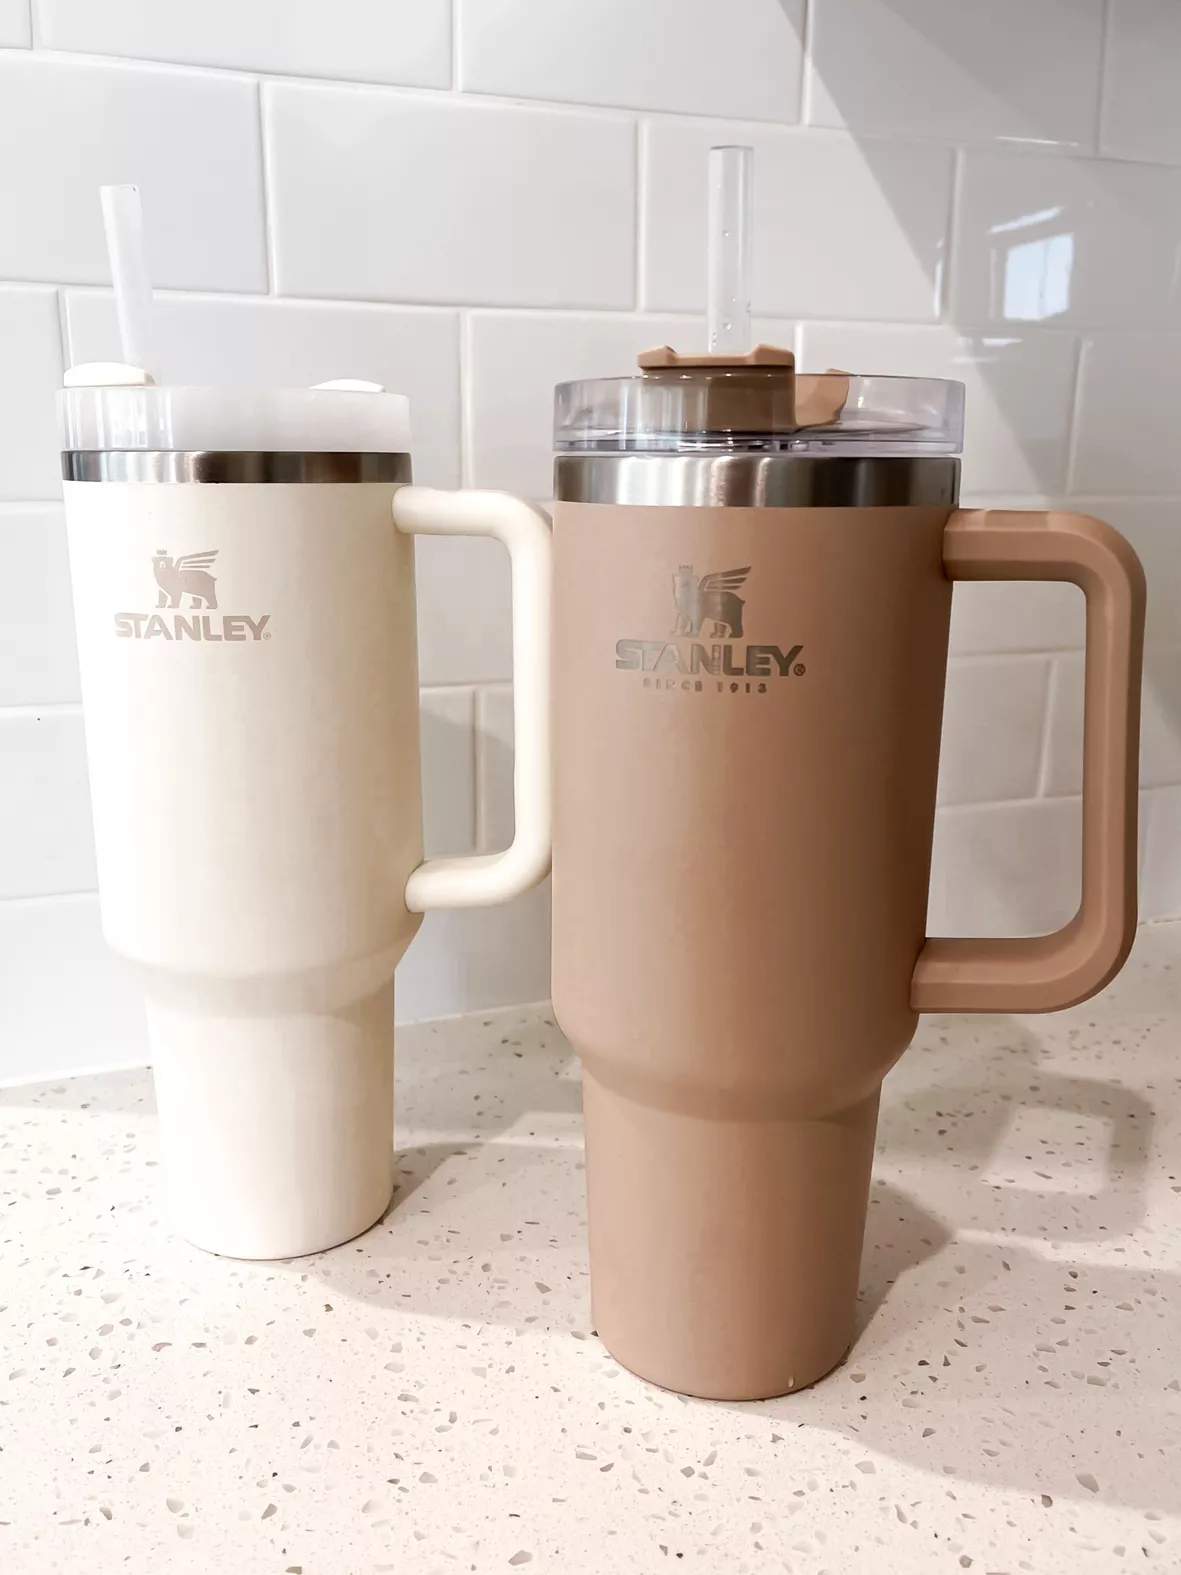 Stanley water cups are just another fad